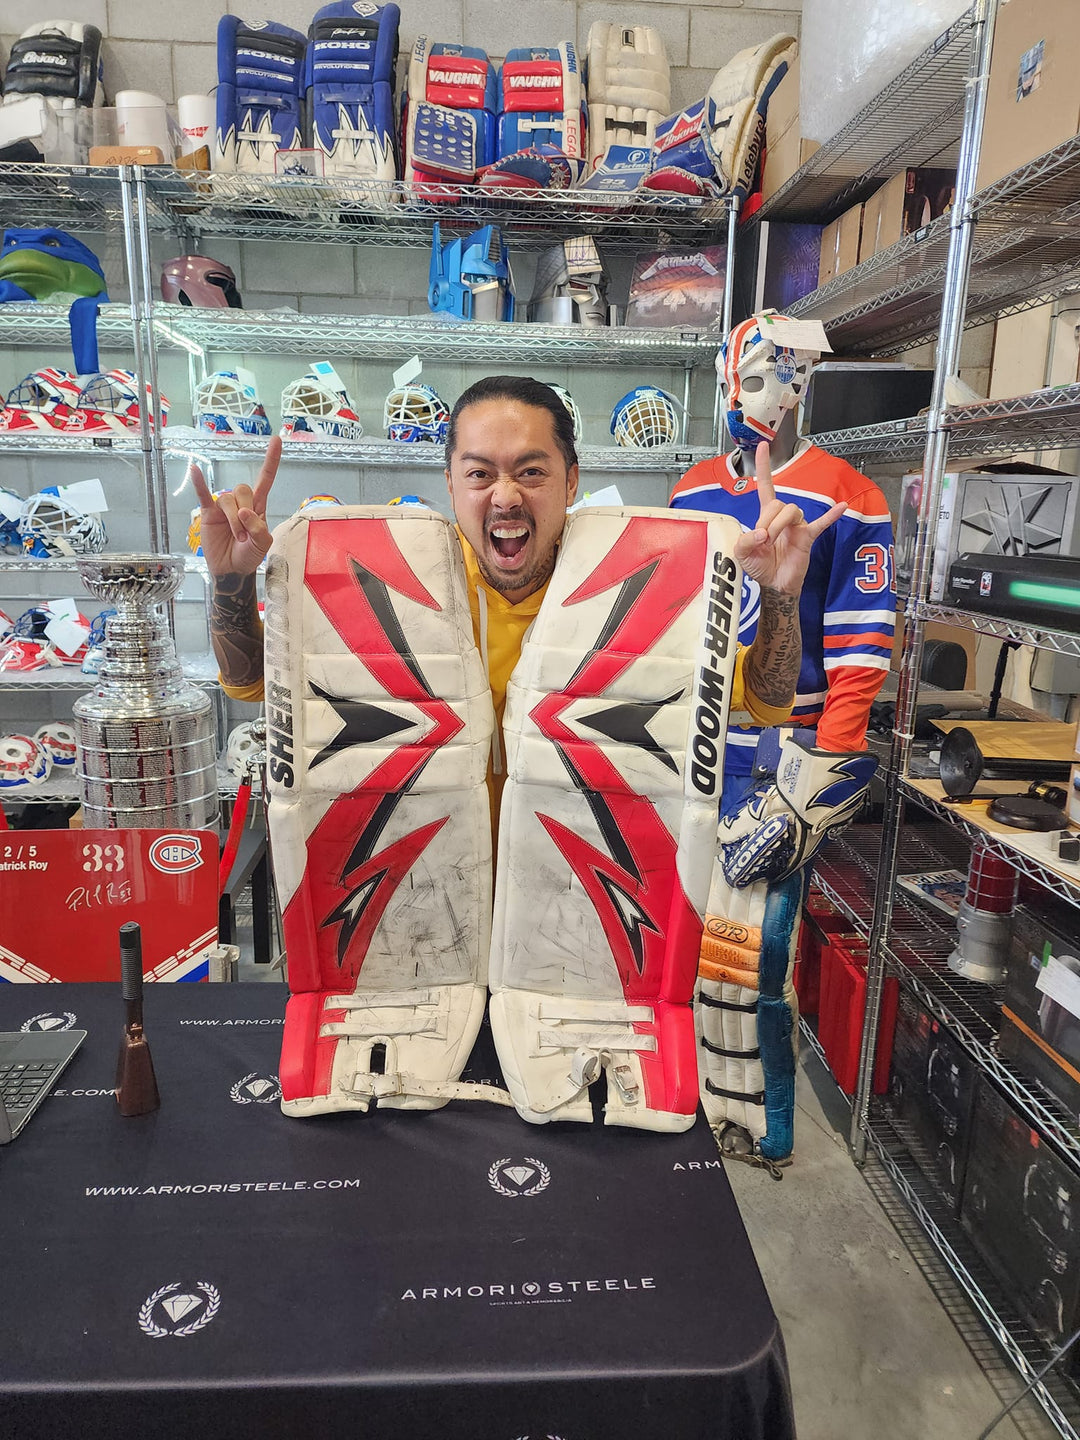 BREAKING: MARTIN BRODEUR Goalie Pads 2010 OLYMPICS GOLD MEDAL Photomatched